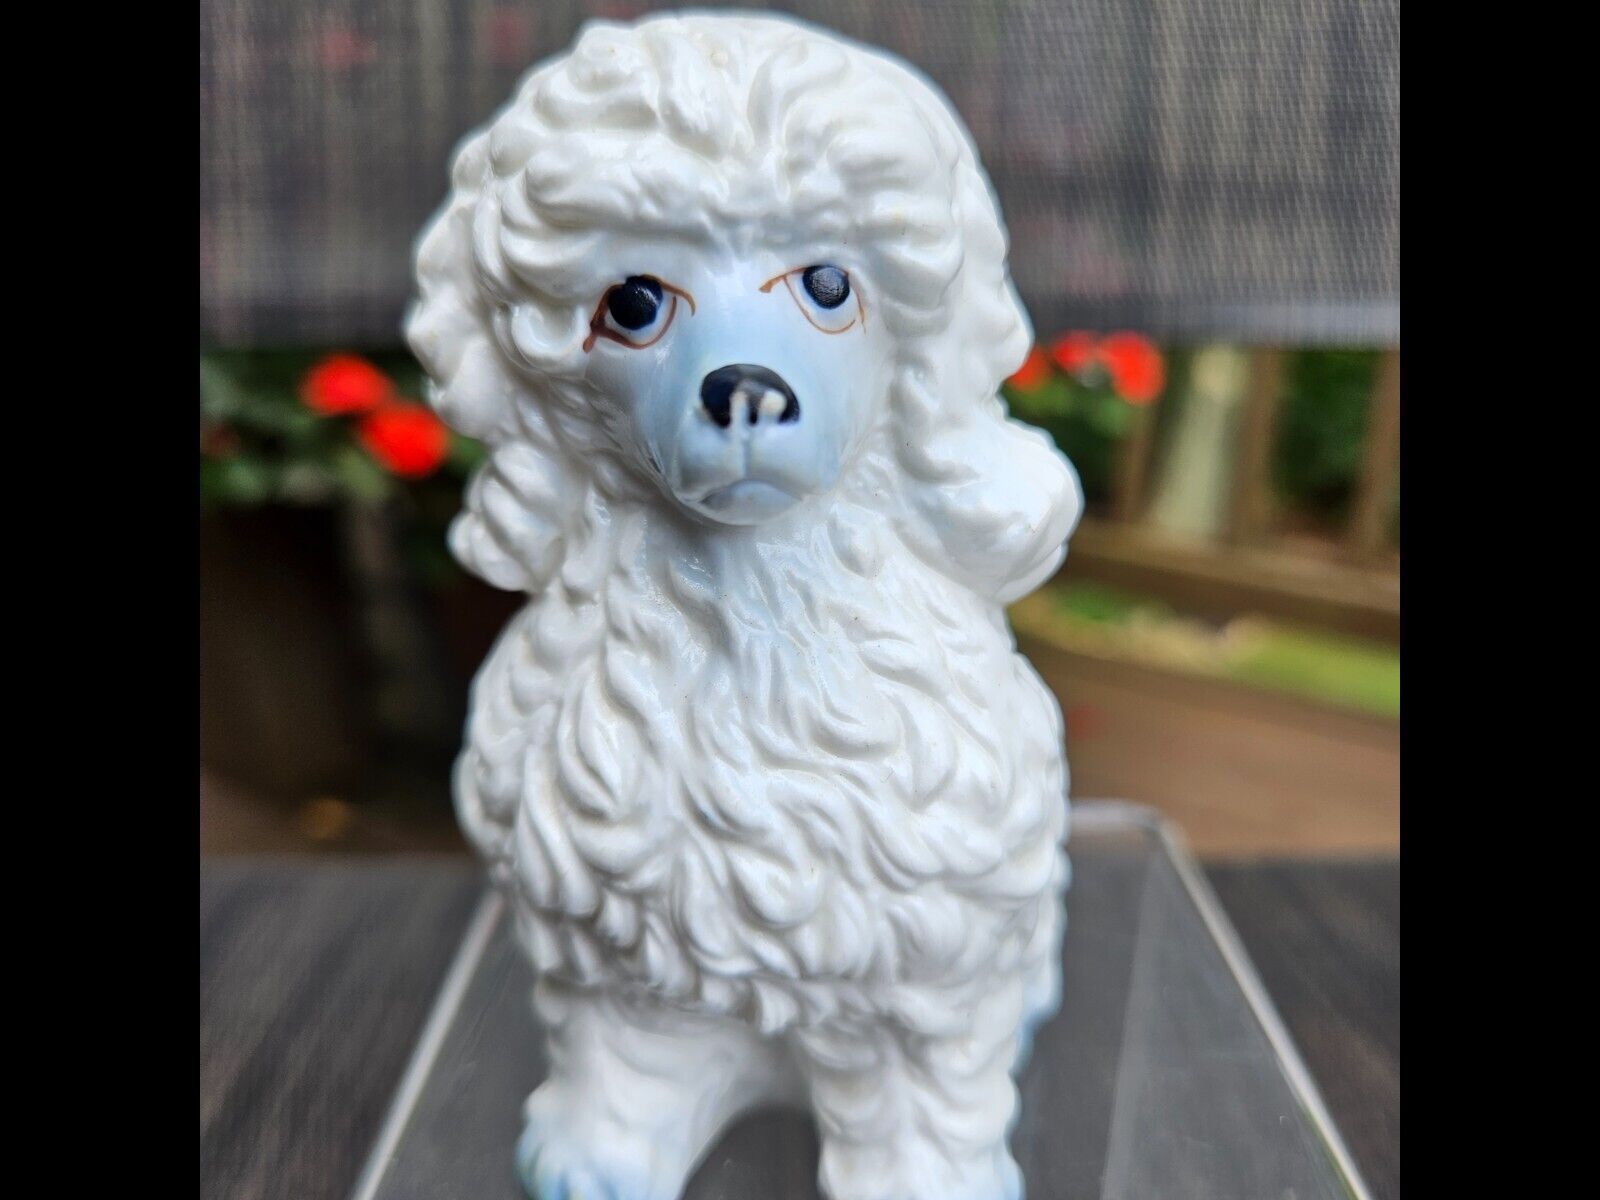 Vintage Bone China White Poodle With Lite Blue Face Figurine Made in Taiwan